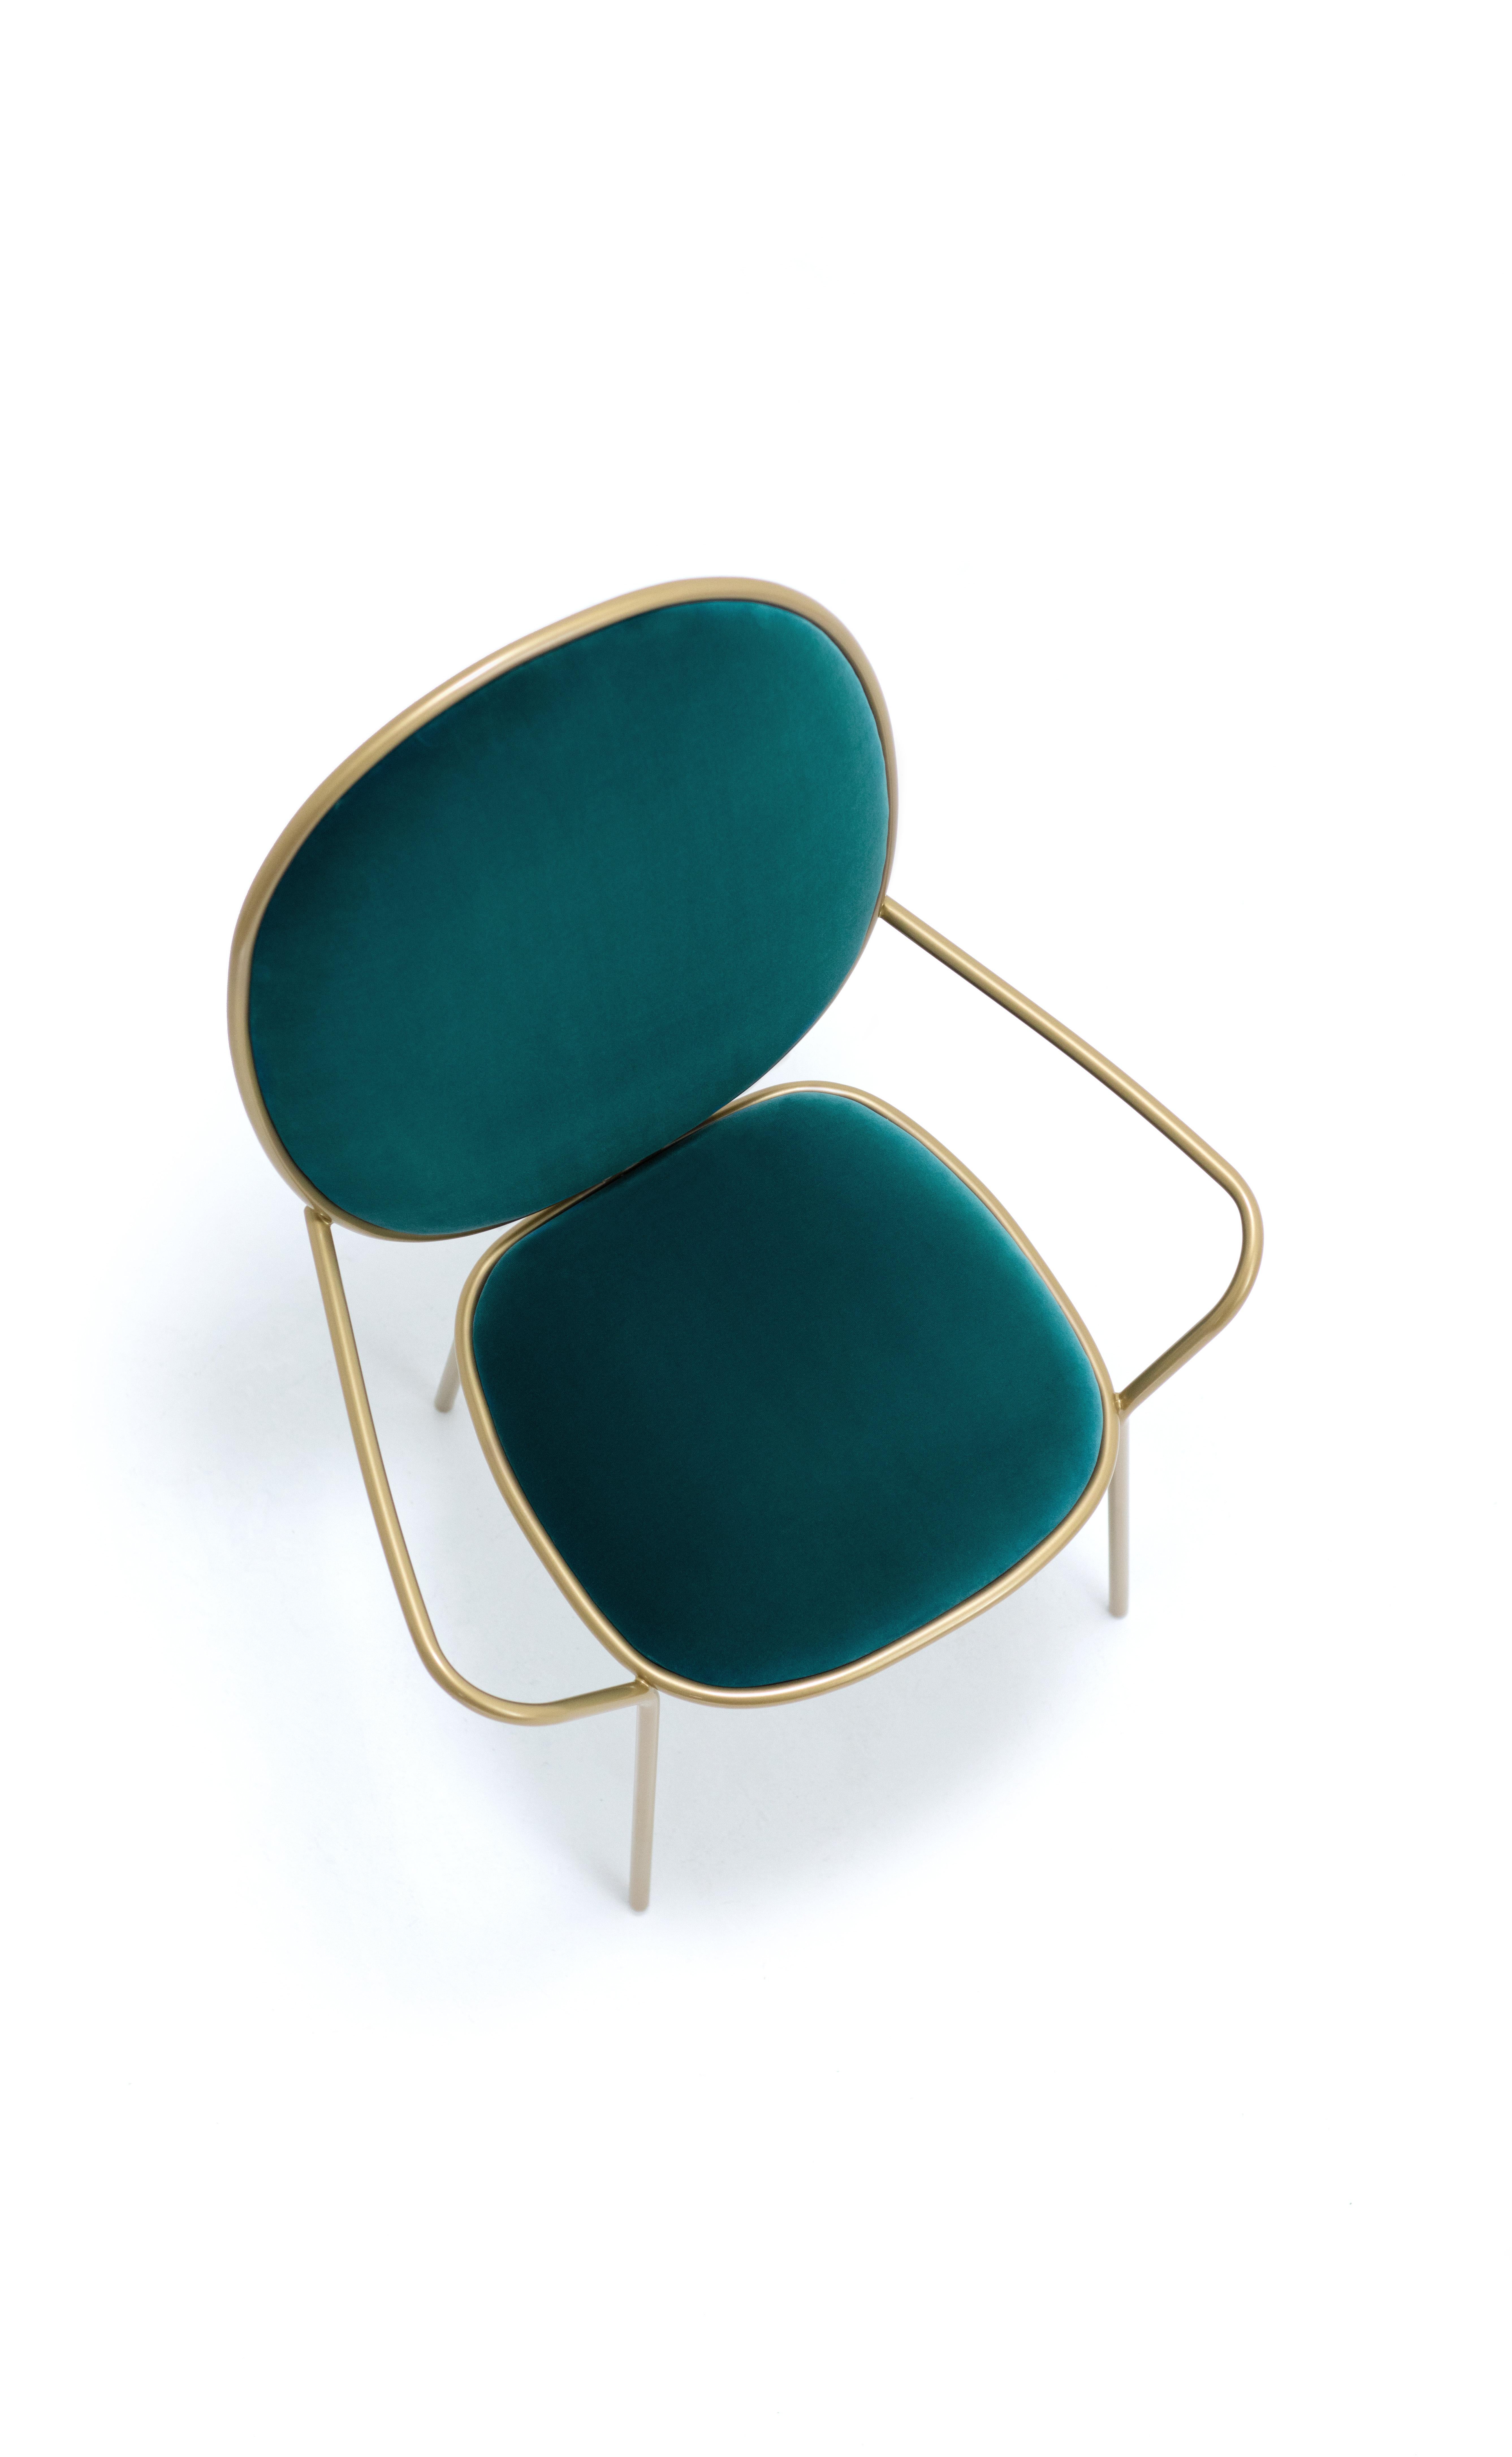 Steel Contemporary Ocean Green Velvet Upholstered Dining Armchair, Stay by Nika Zupanc